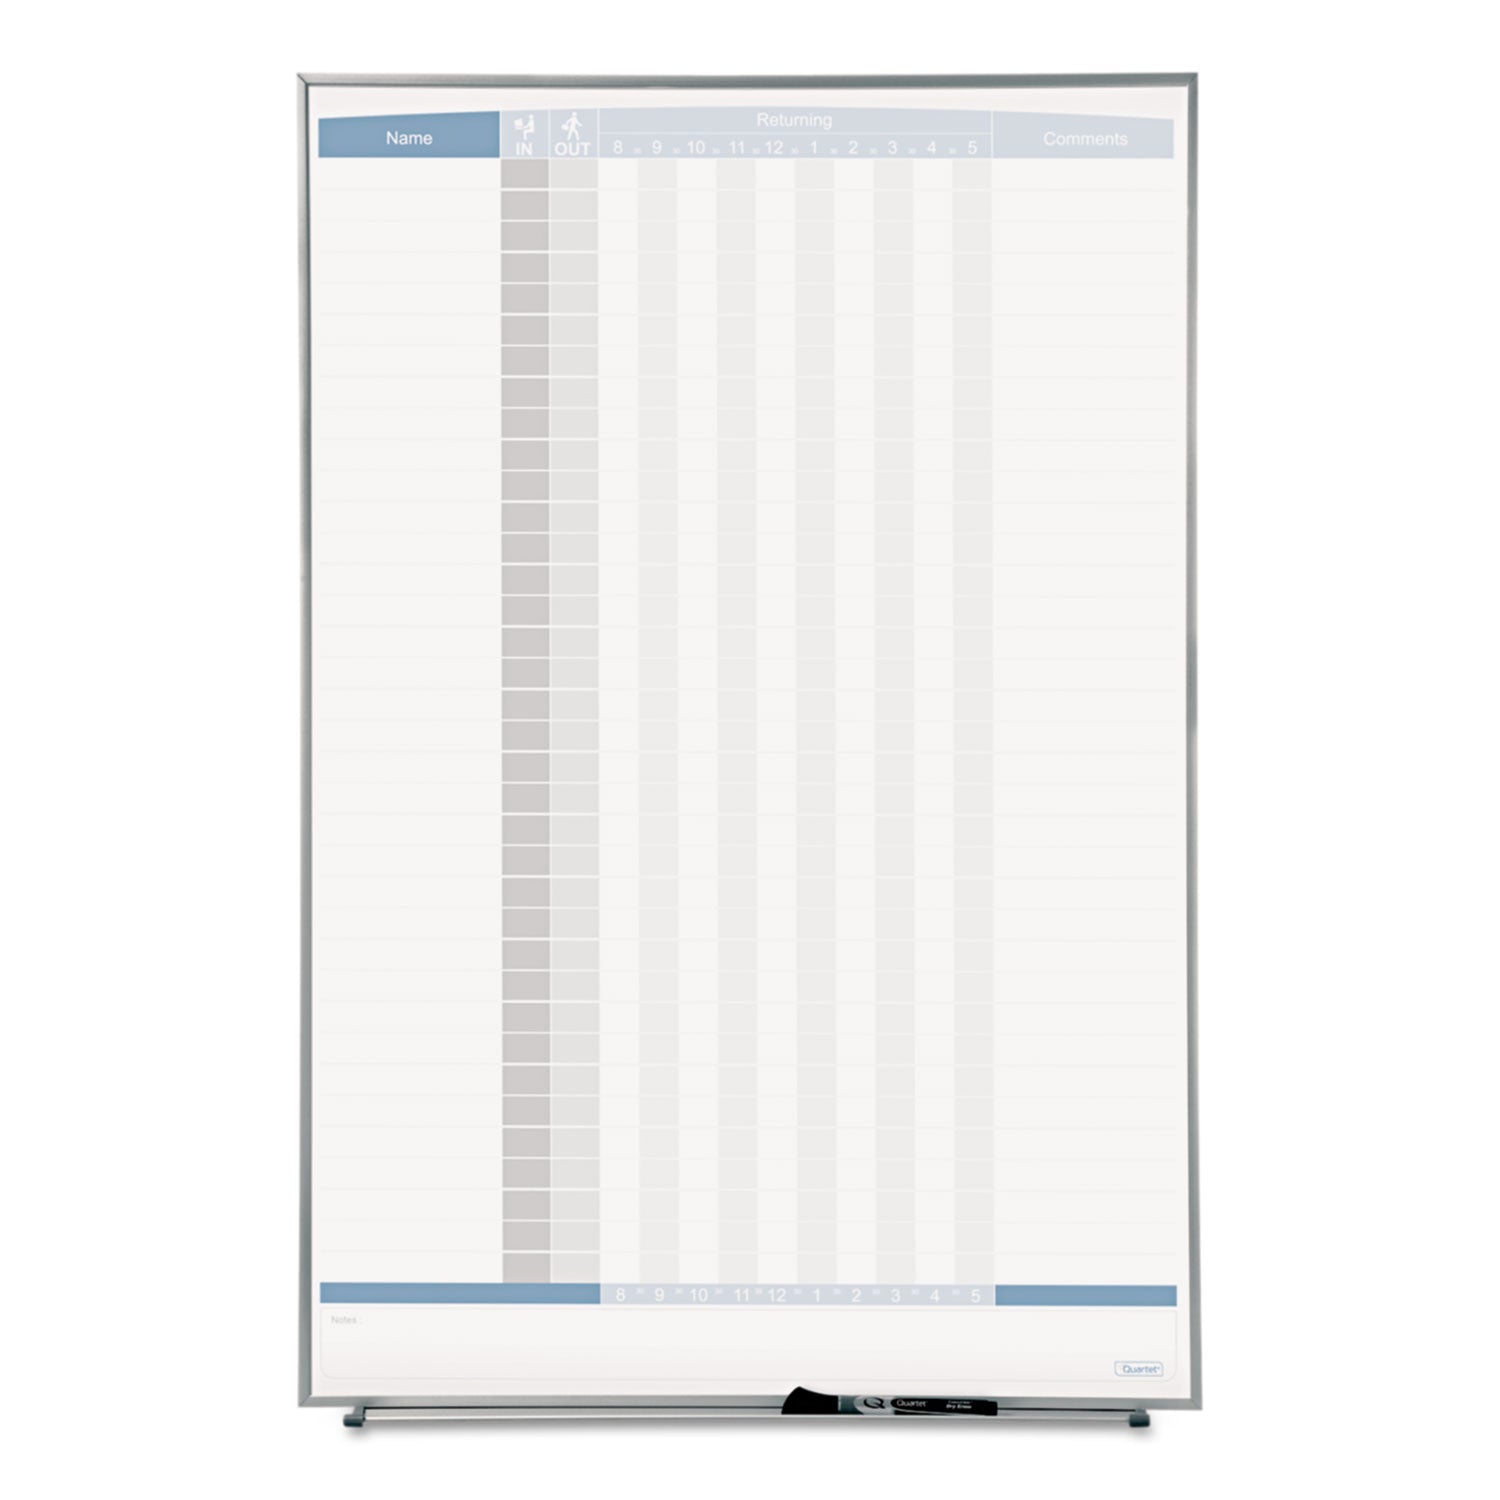 Matrix Employee In/Out Board, Up to 36 Employees, 34 x 23, White Surface, Silver Aluminum Frame - 